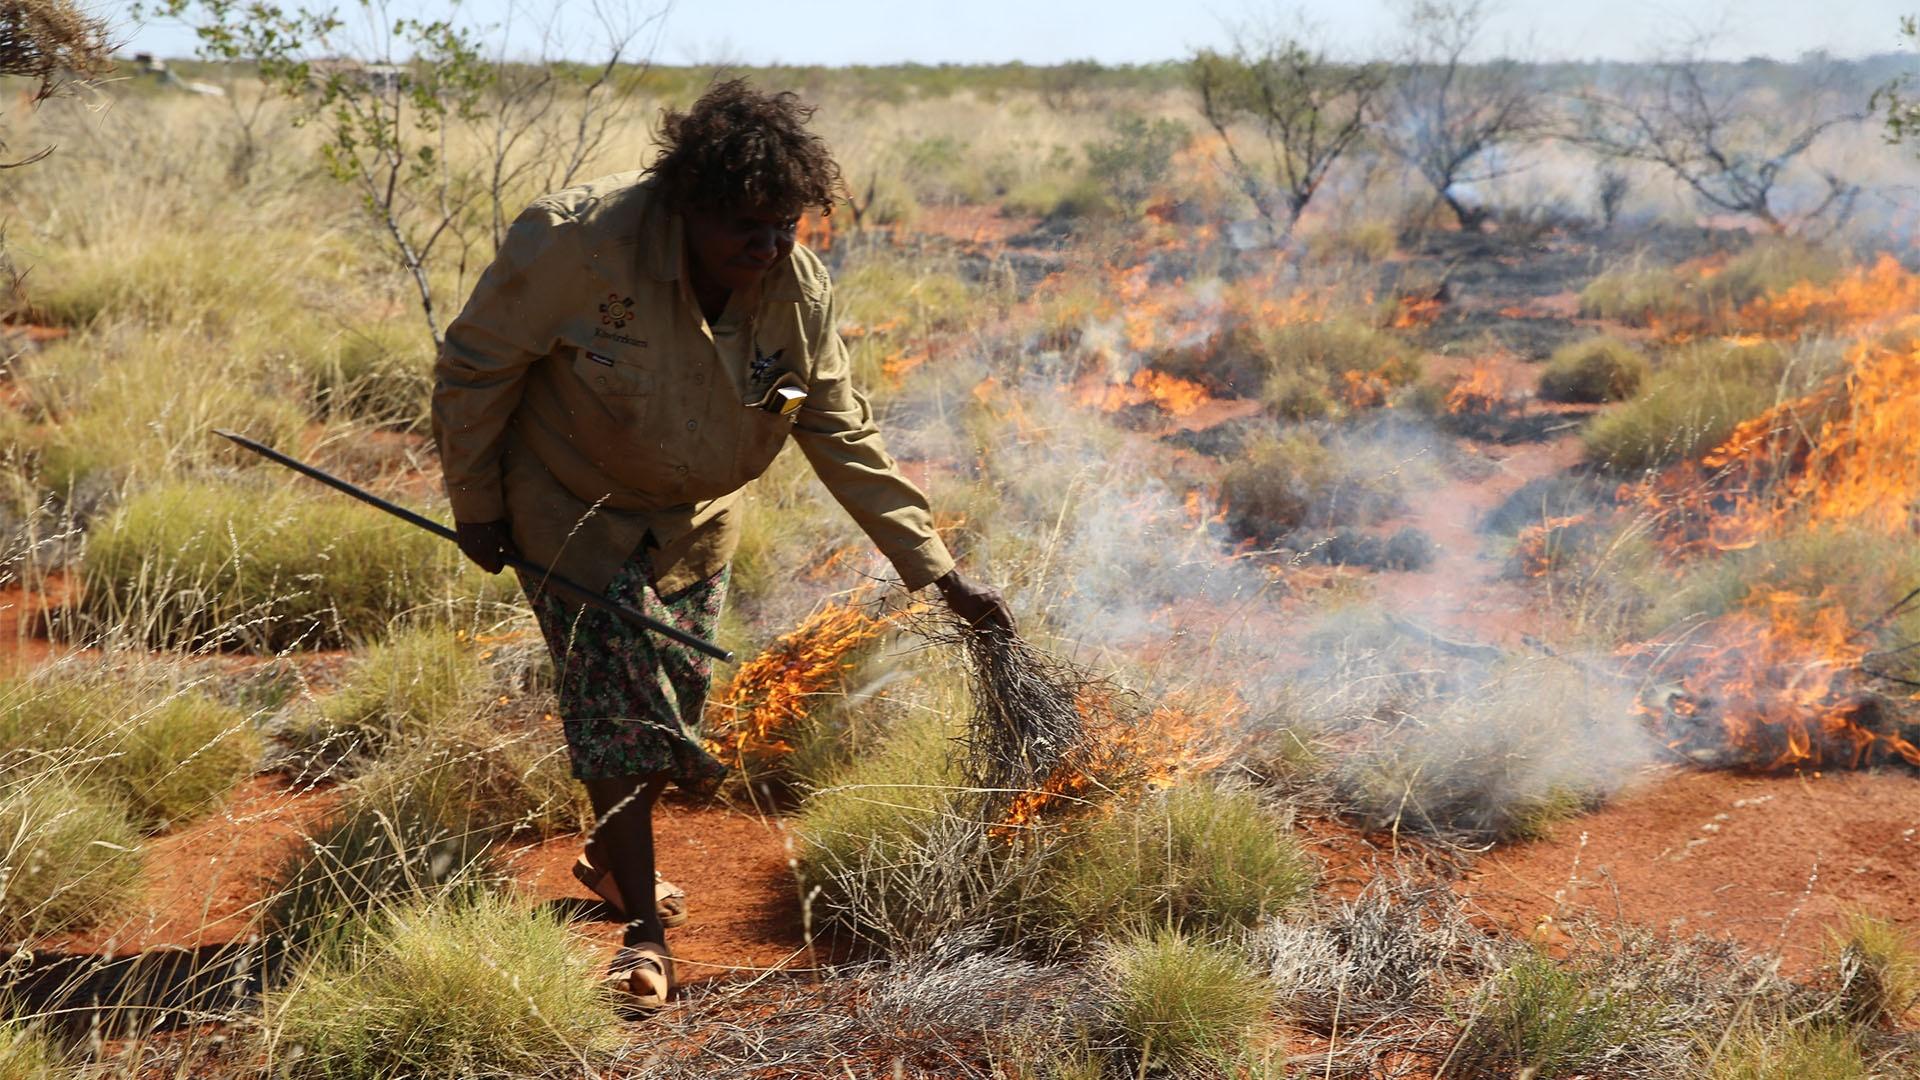 Image of a Kiwirrkurra Ranger setting controlled fires to the landscape in Australia.